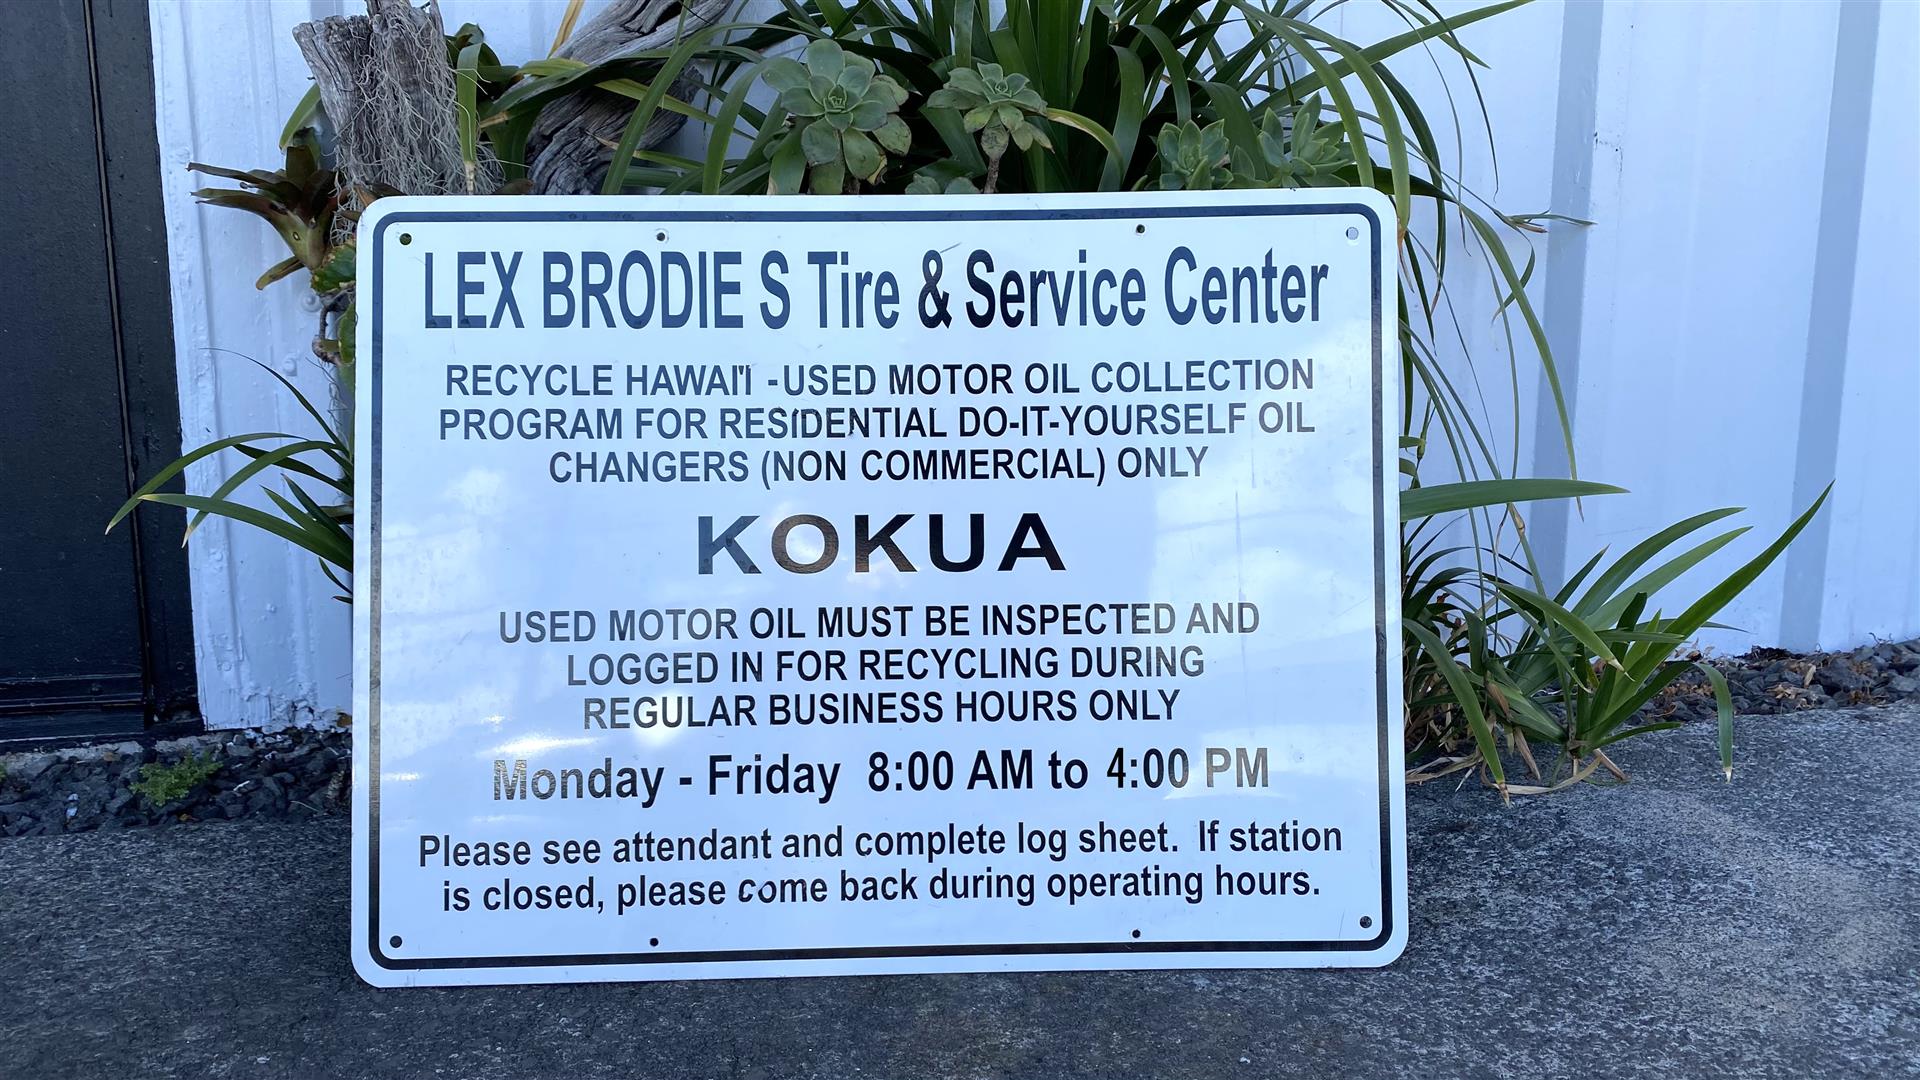 LEX BRODIE'S TIRE IN HILO is a Used Motor Oil Recycle Station